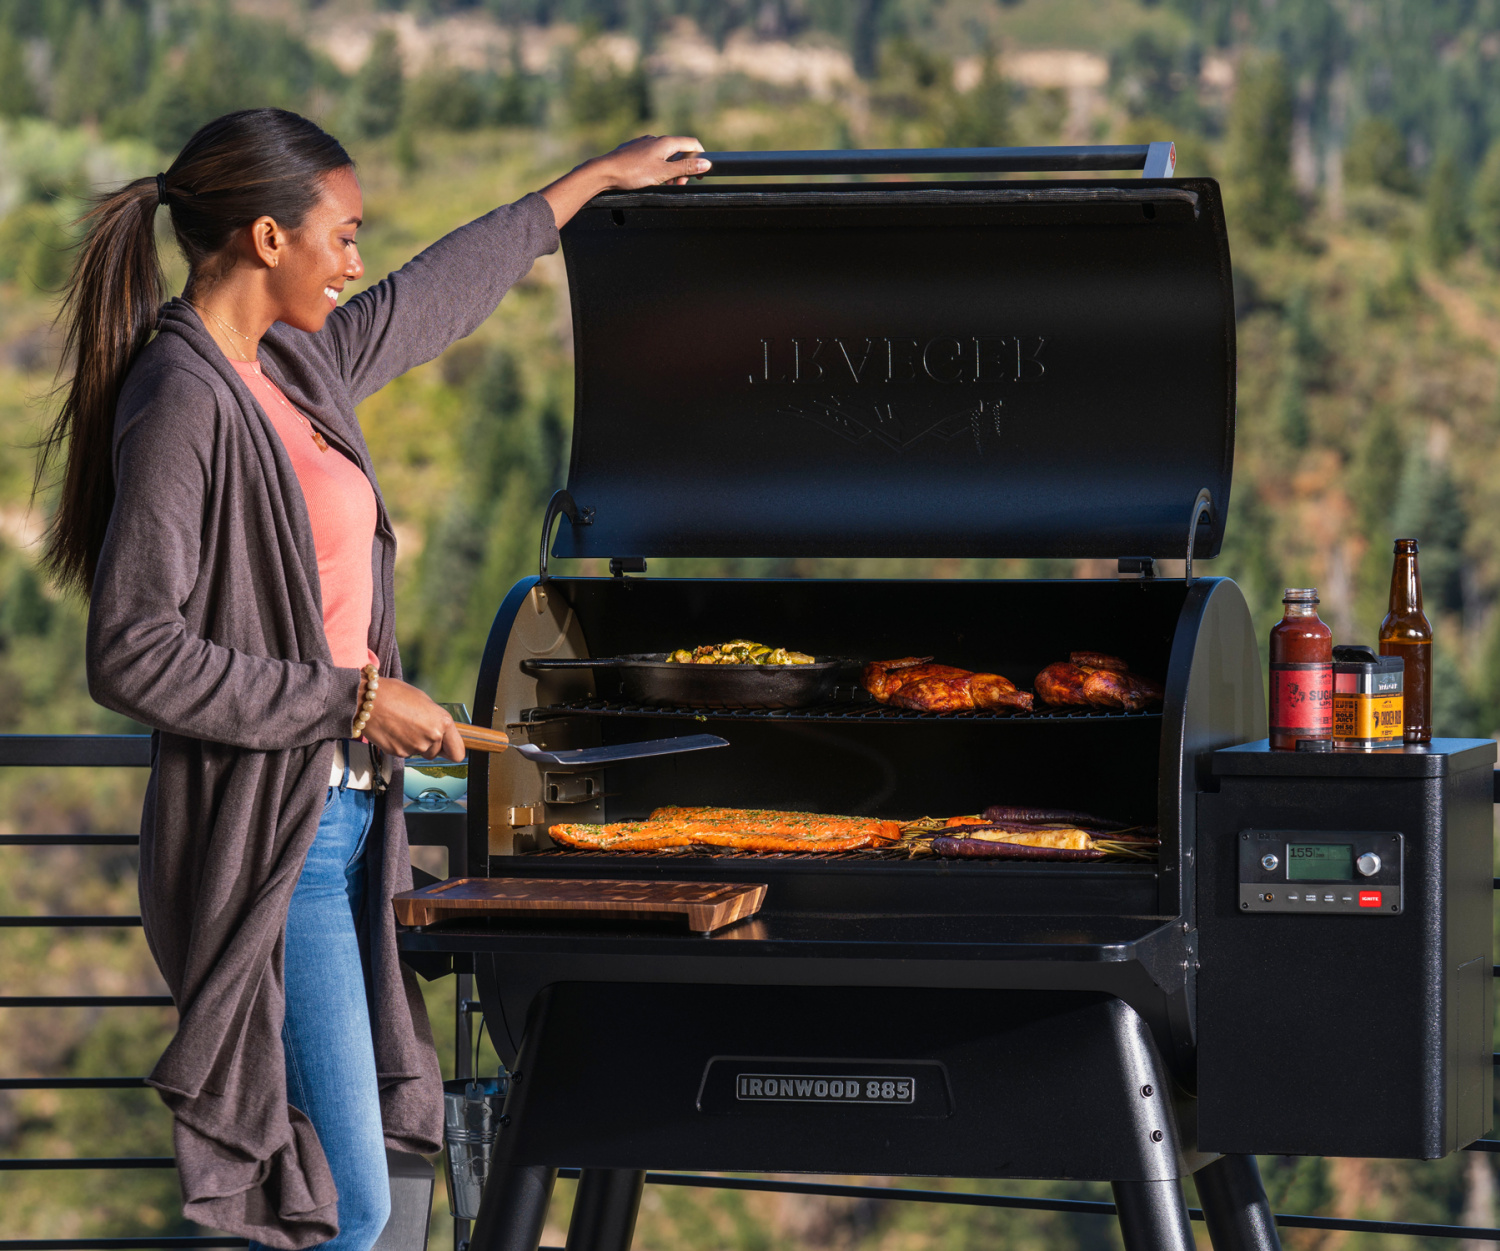 Cook with superior flavour on a Traeger